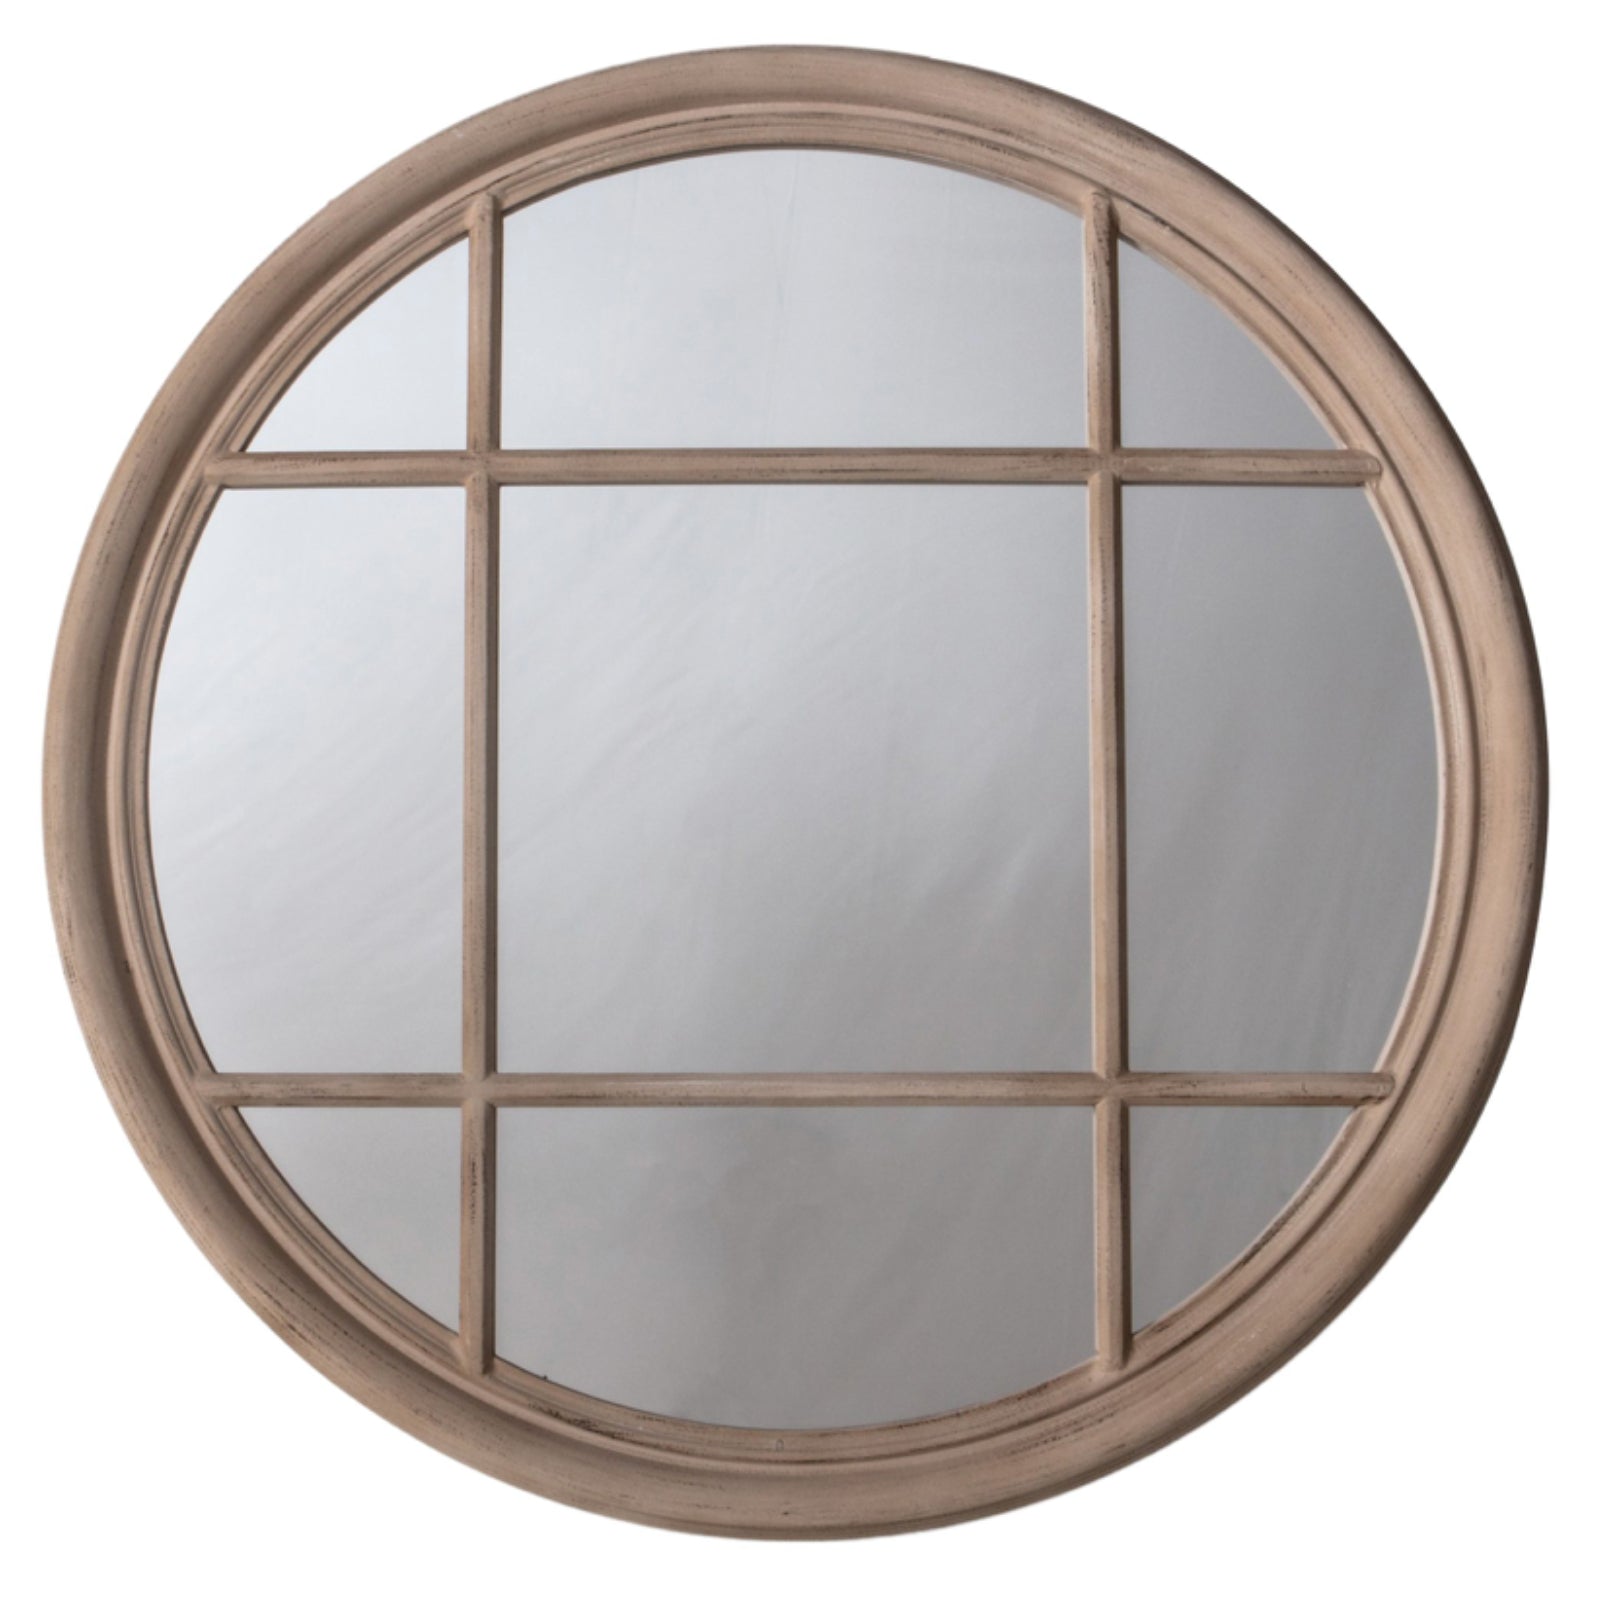 Extra Large Round Window Mirror - The Farthing